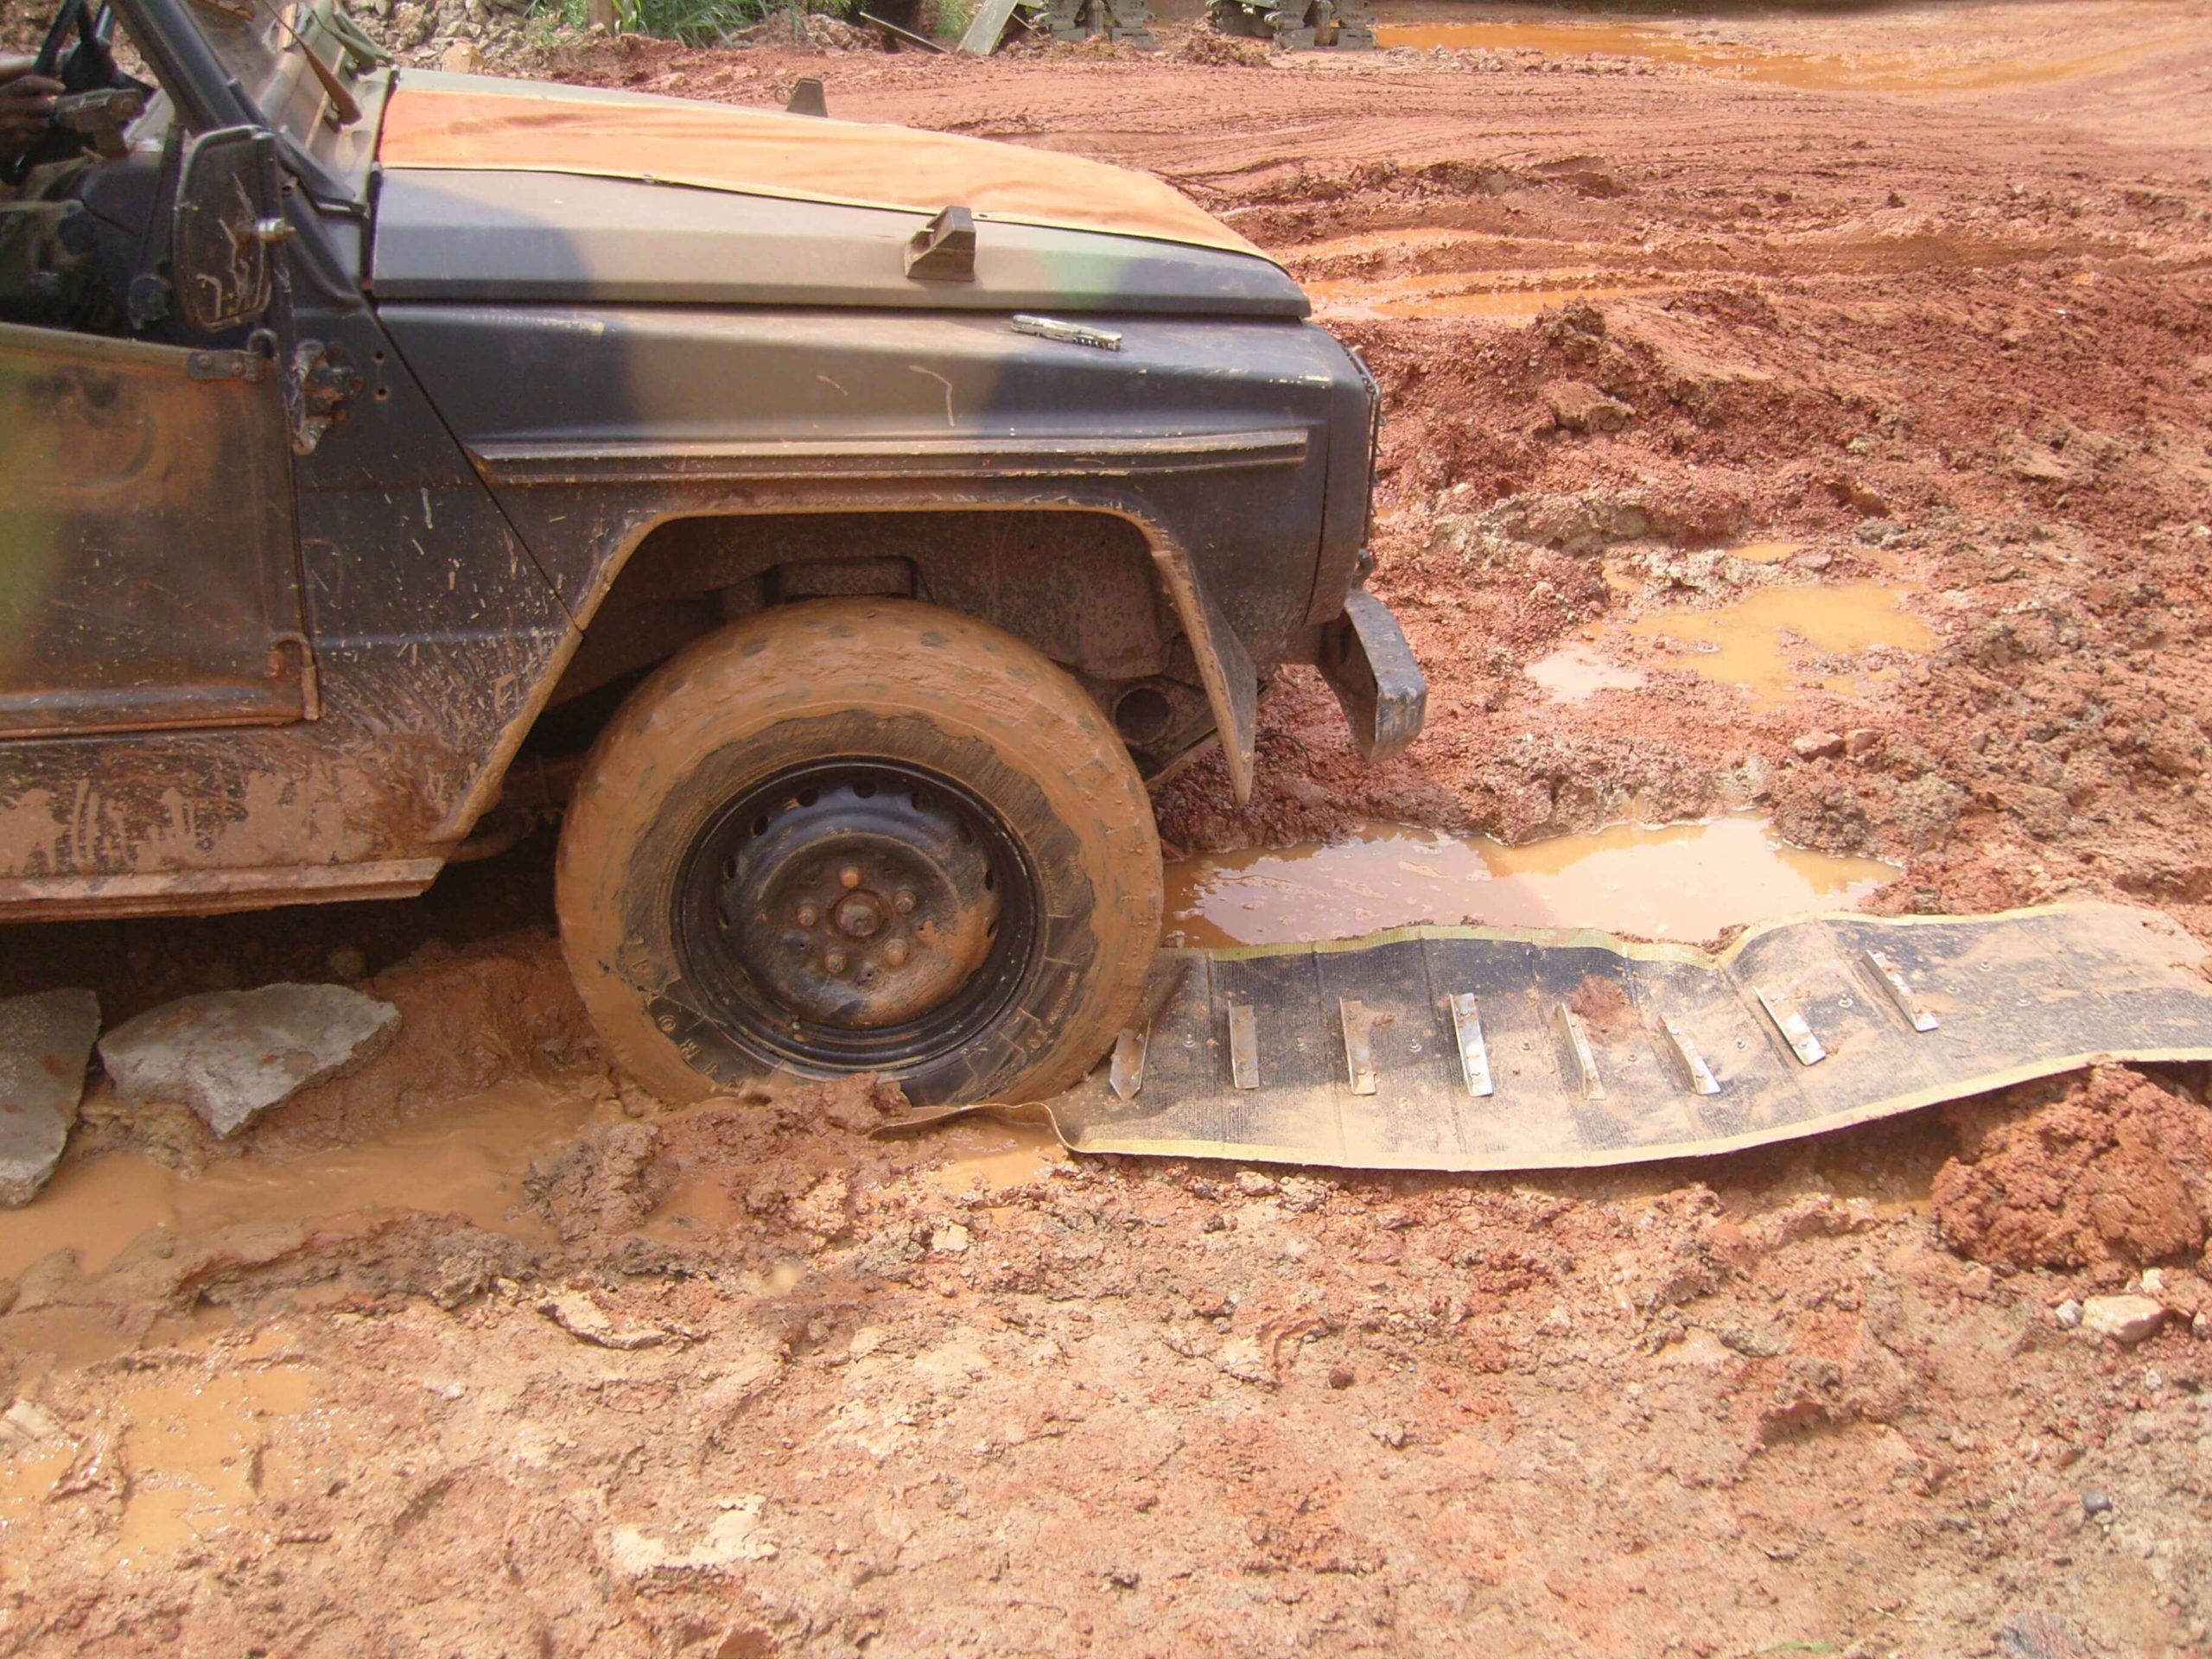 Musthane: Tire Traction Mats to get out of mud, snow, or sand